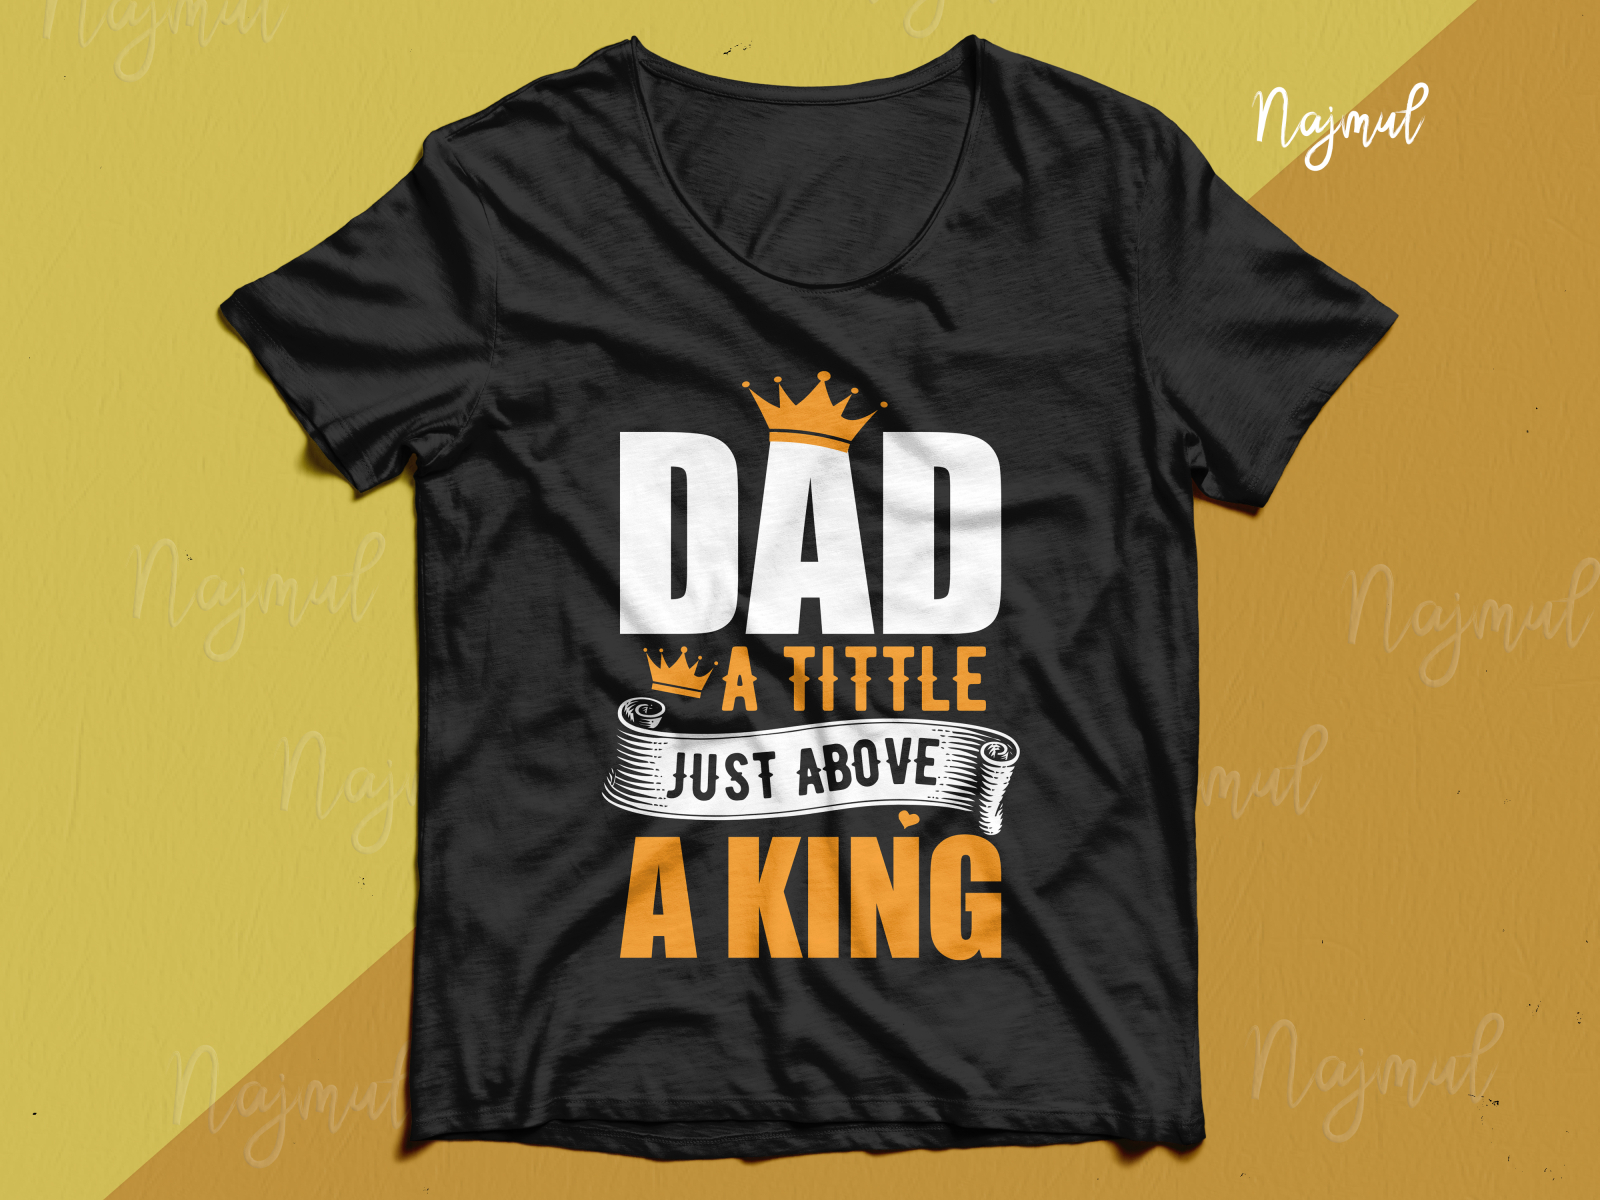 Dad a tittle just above a king- Father's day t shirt design by Najmul ...